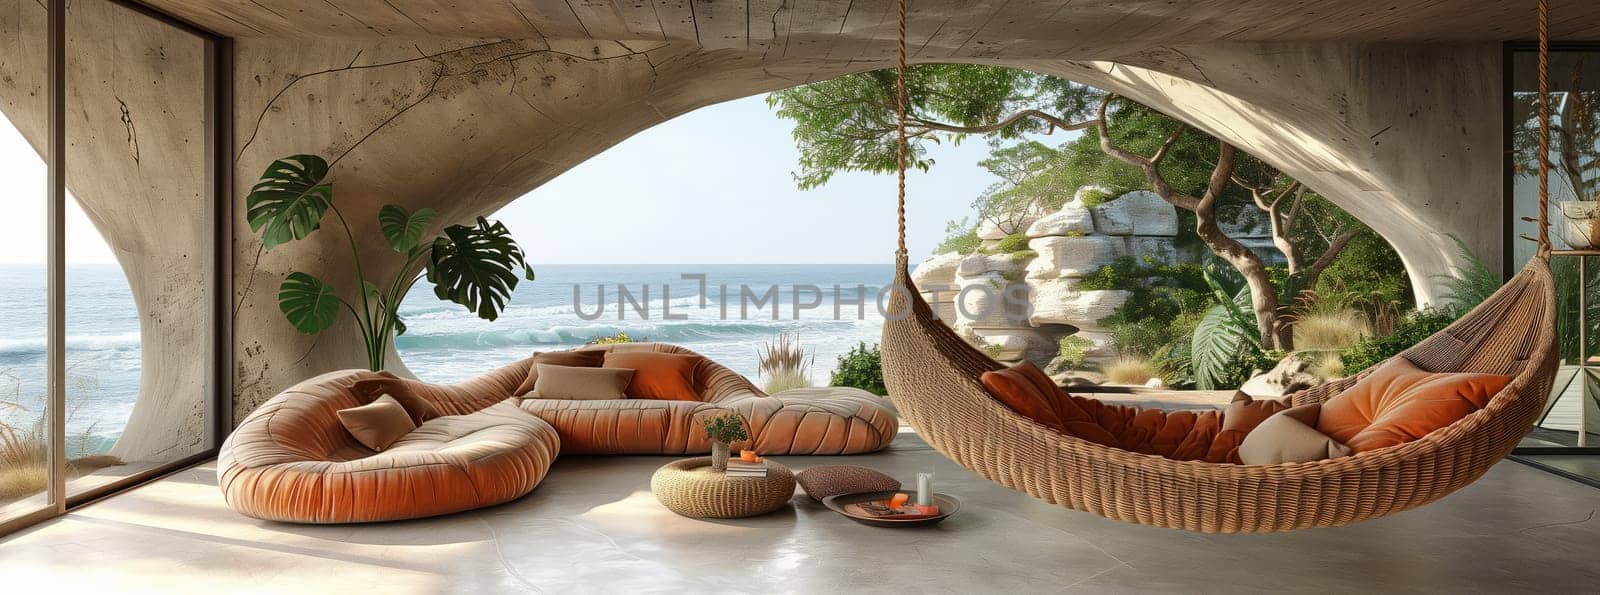 A cozy living room with a hammock overlooking the ocean by richwolf